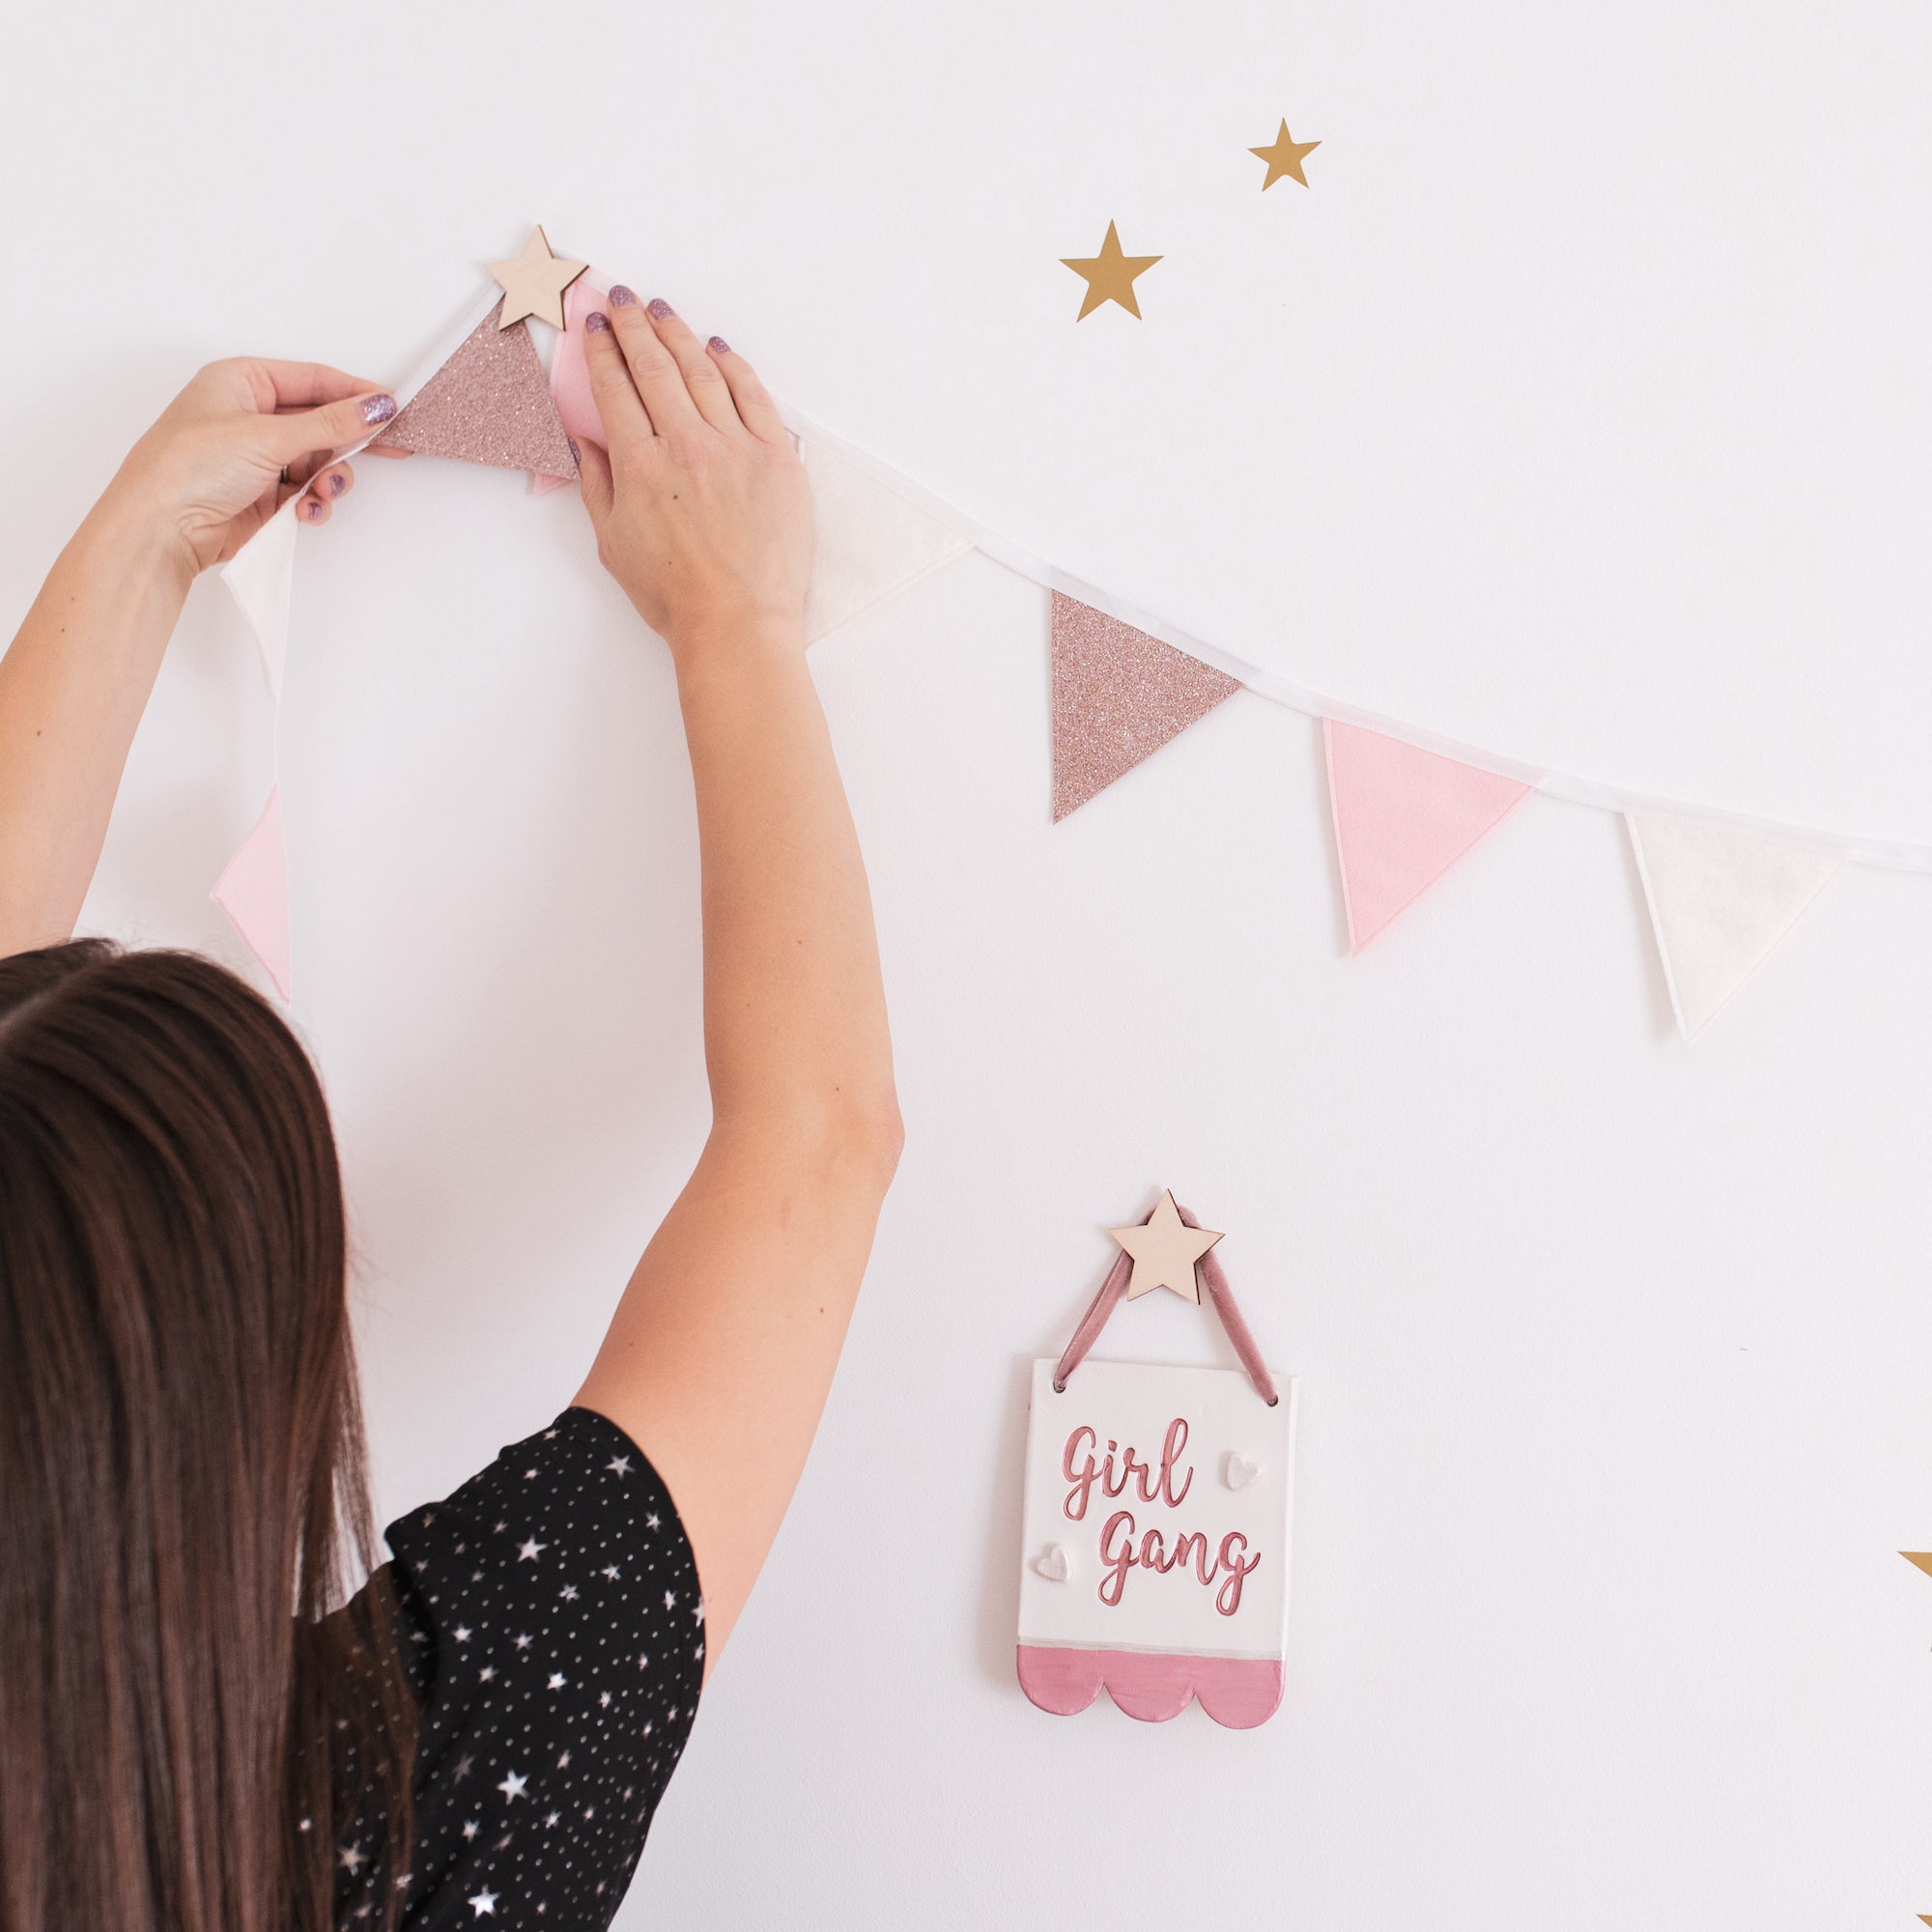 Star Wall hooks - how to hang bunting